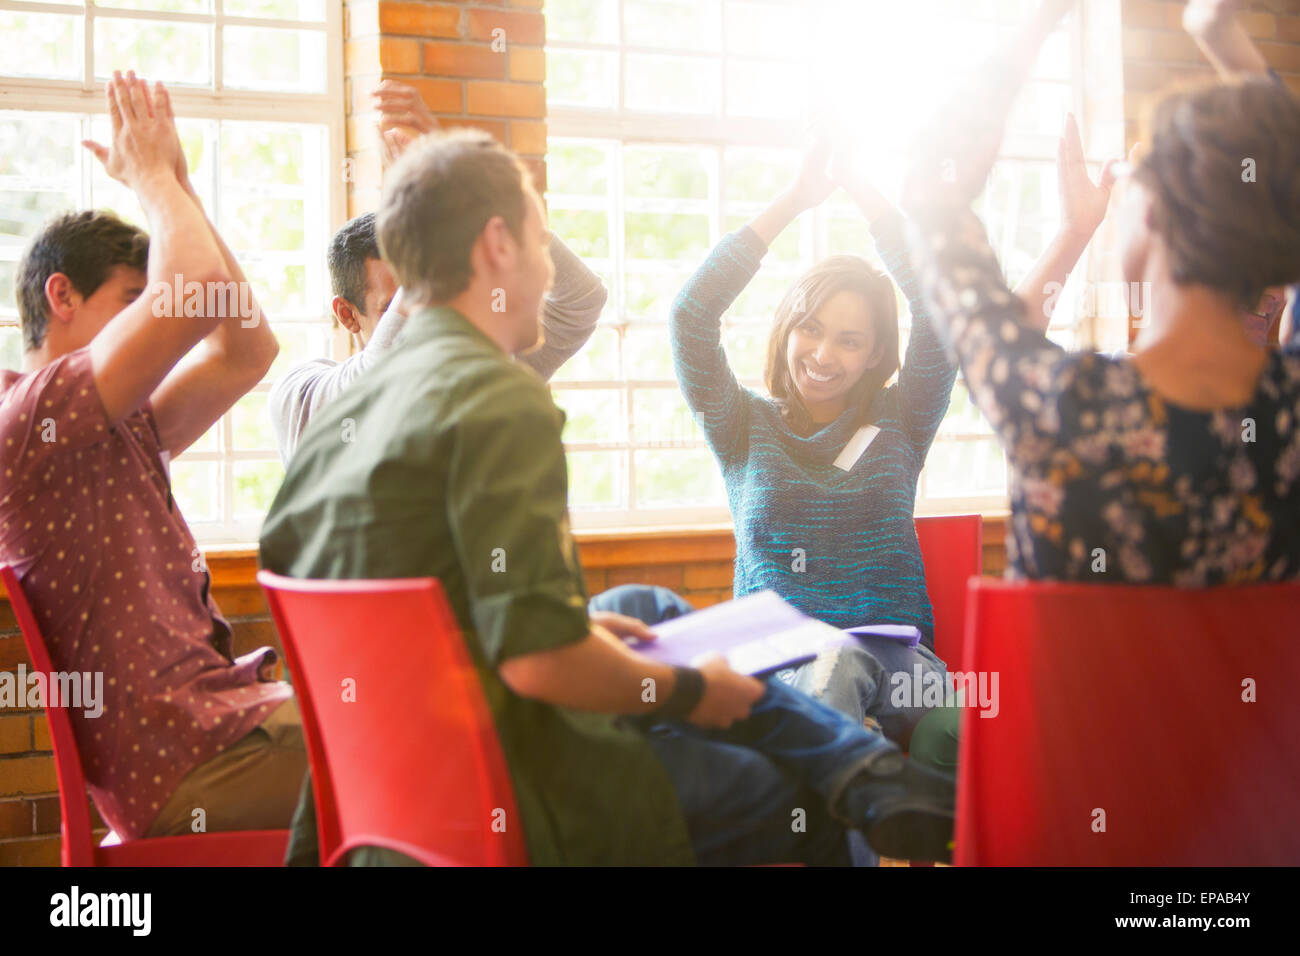 people clapping overhead group therapy Stock Photo